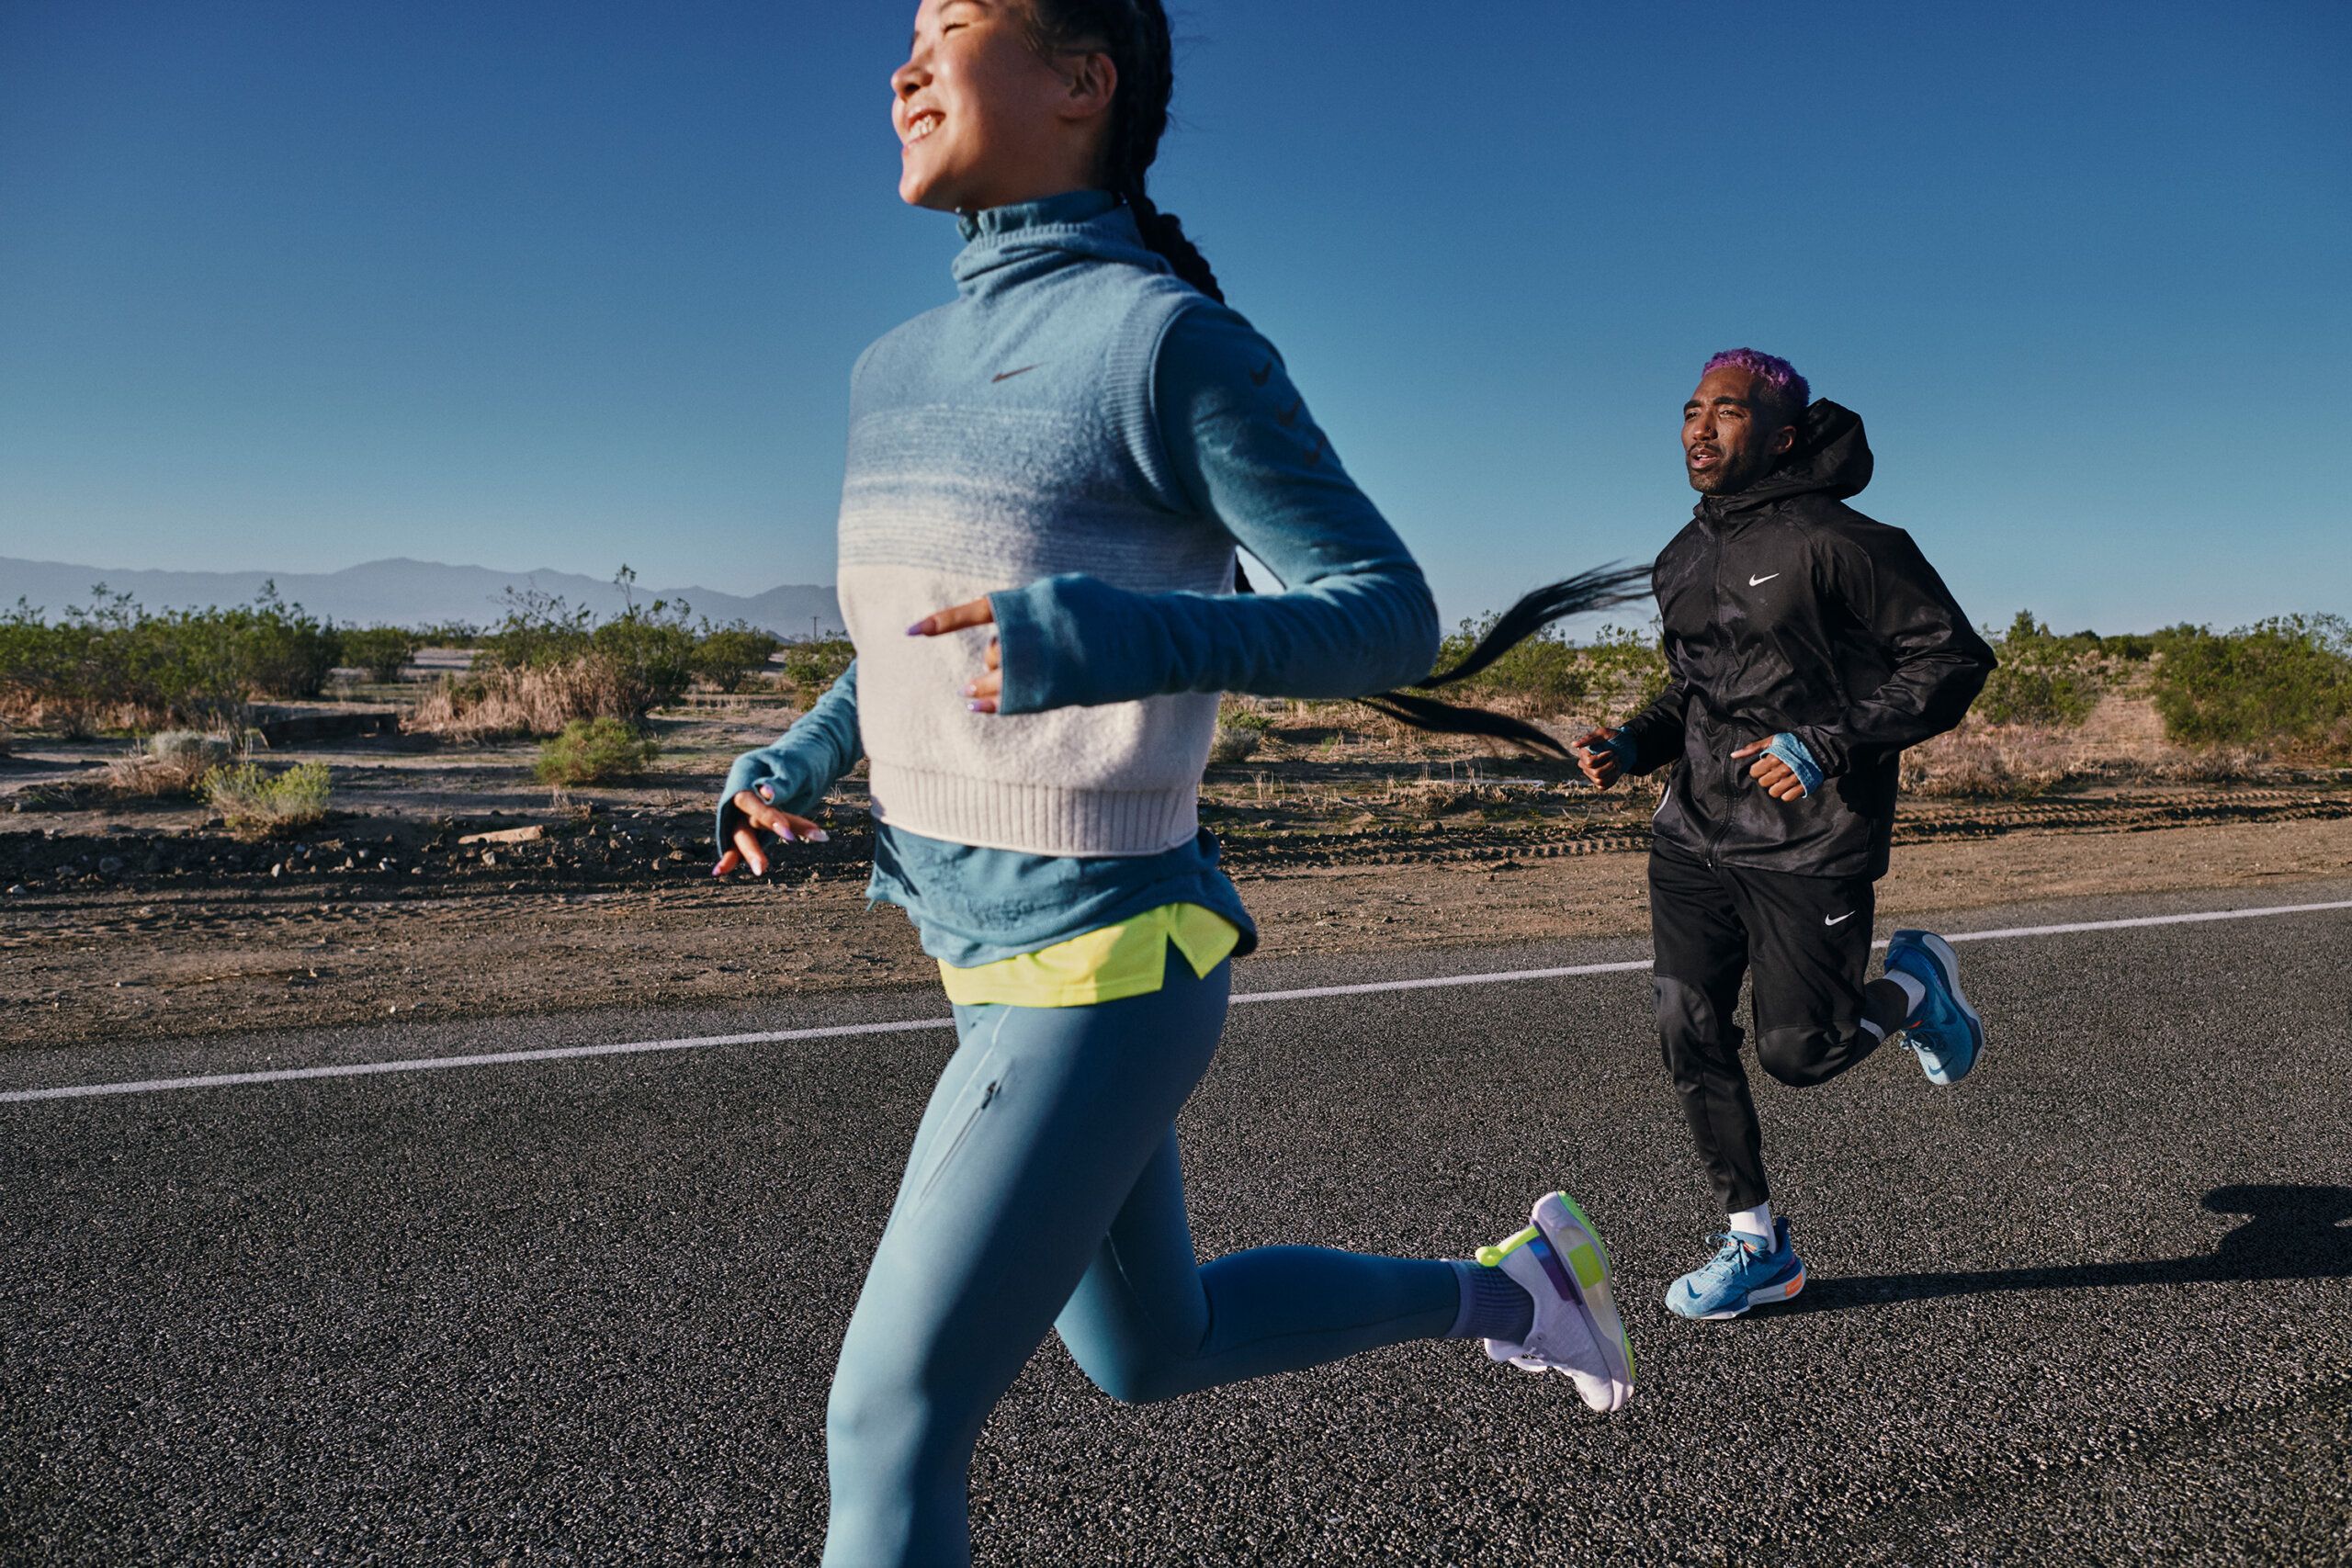 Mi Jang and Chris running together on empty flat road with desert scenery and blue sky background